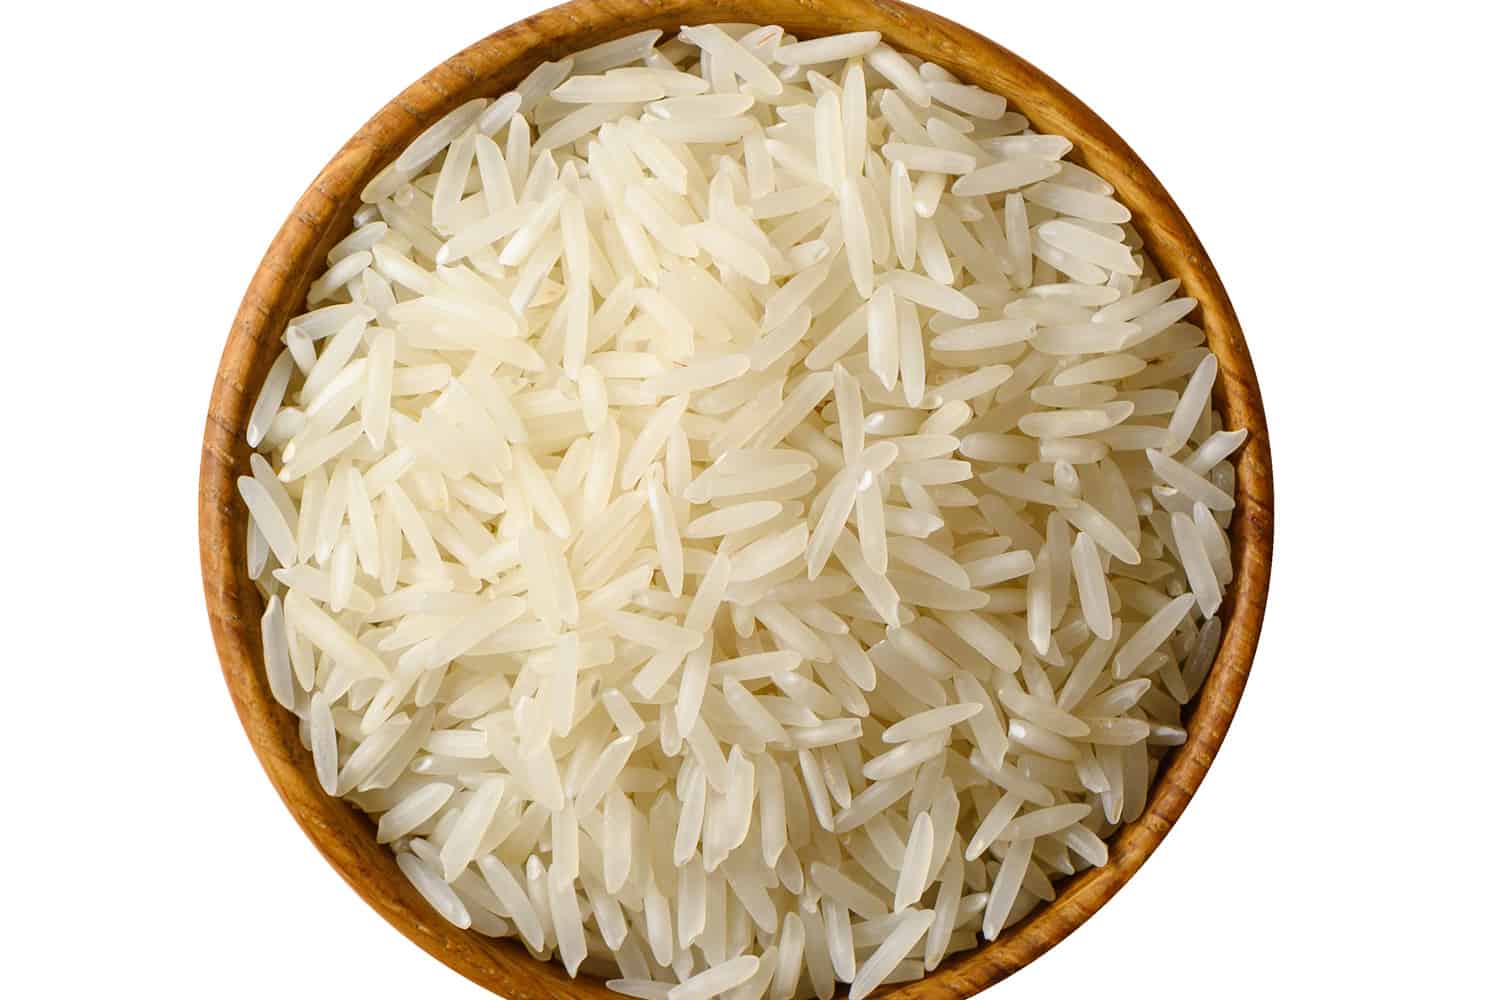 Wooden bowl with white long rice basmati isolated on white background.